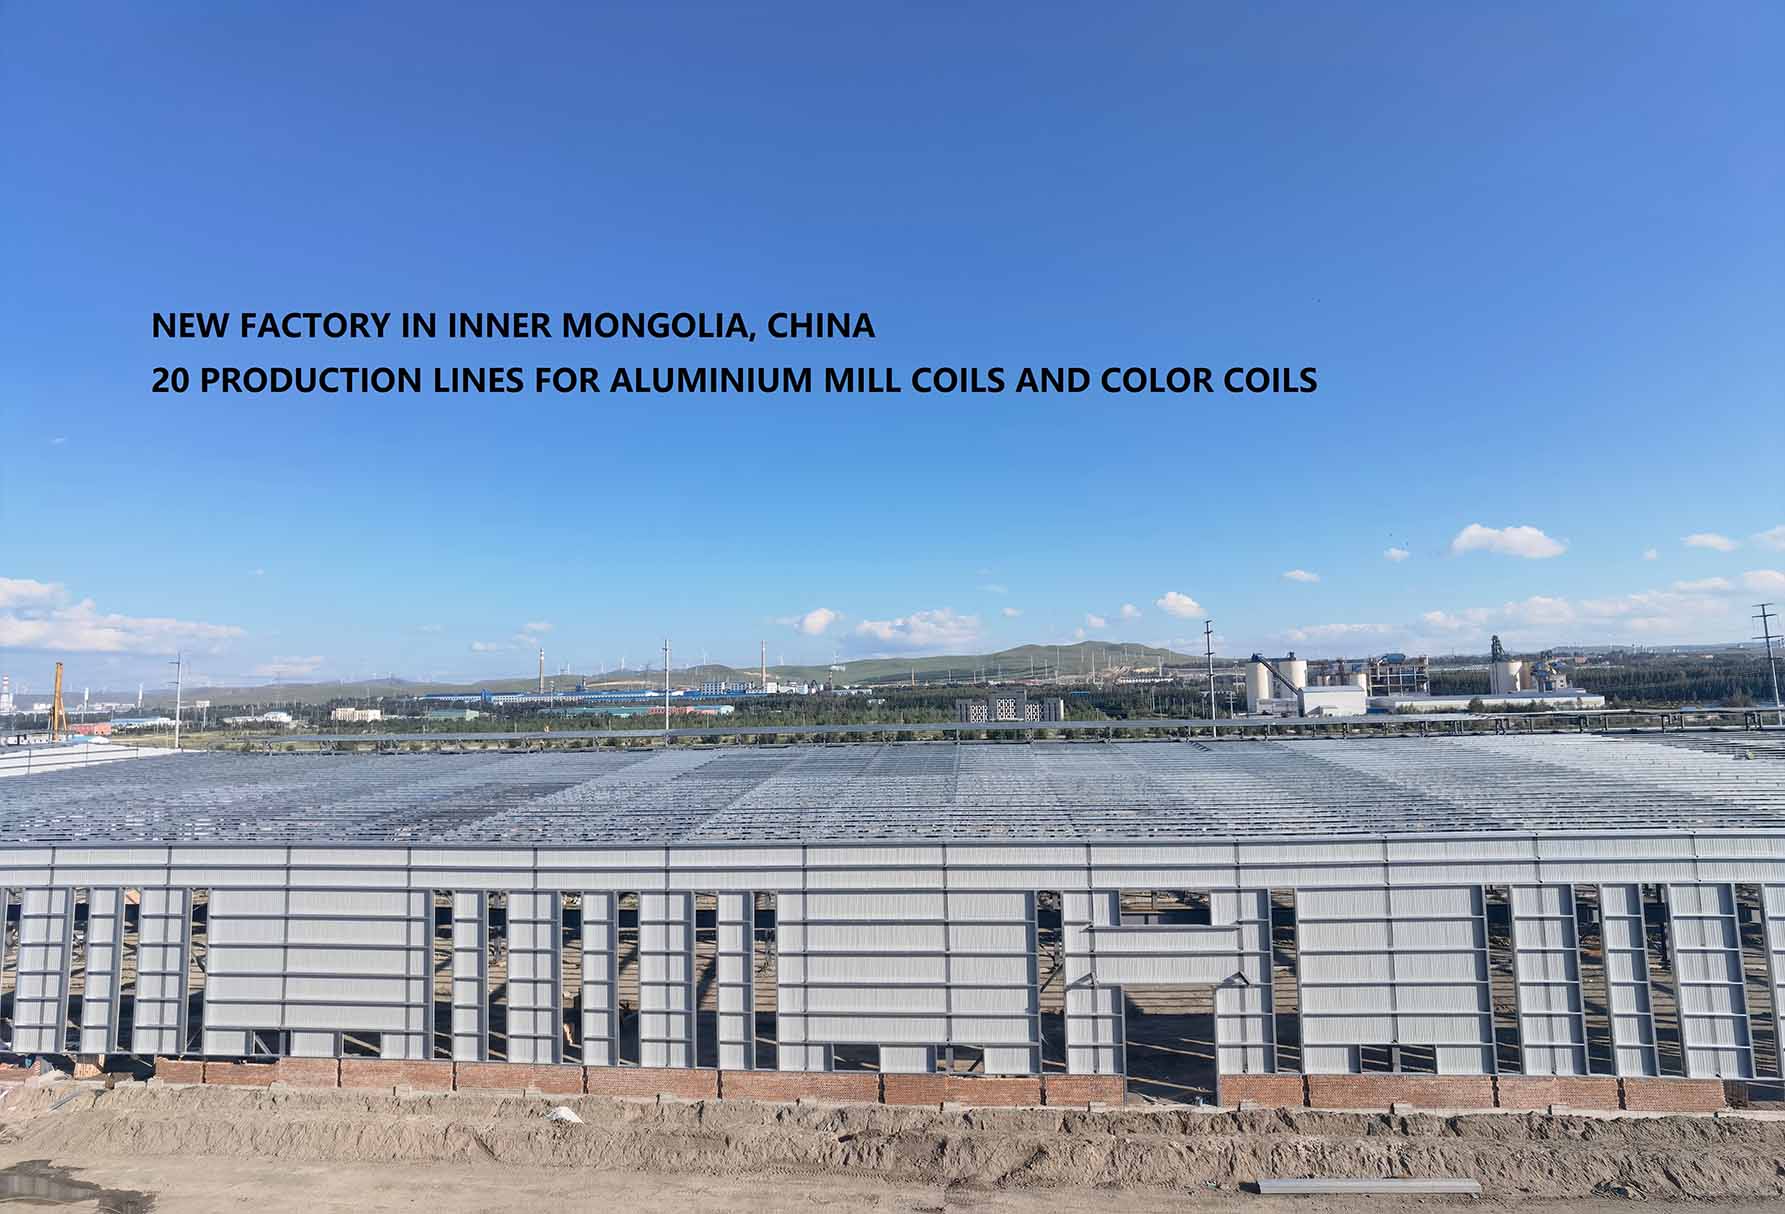 ZHAOQING DINGFENG BUILDING MATERIALS CO., LTD. NEW FACTORY IN INNER MONGOLIA, CHINA